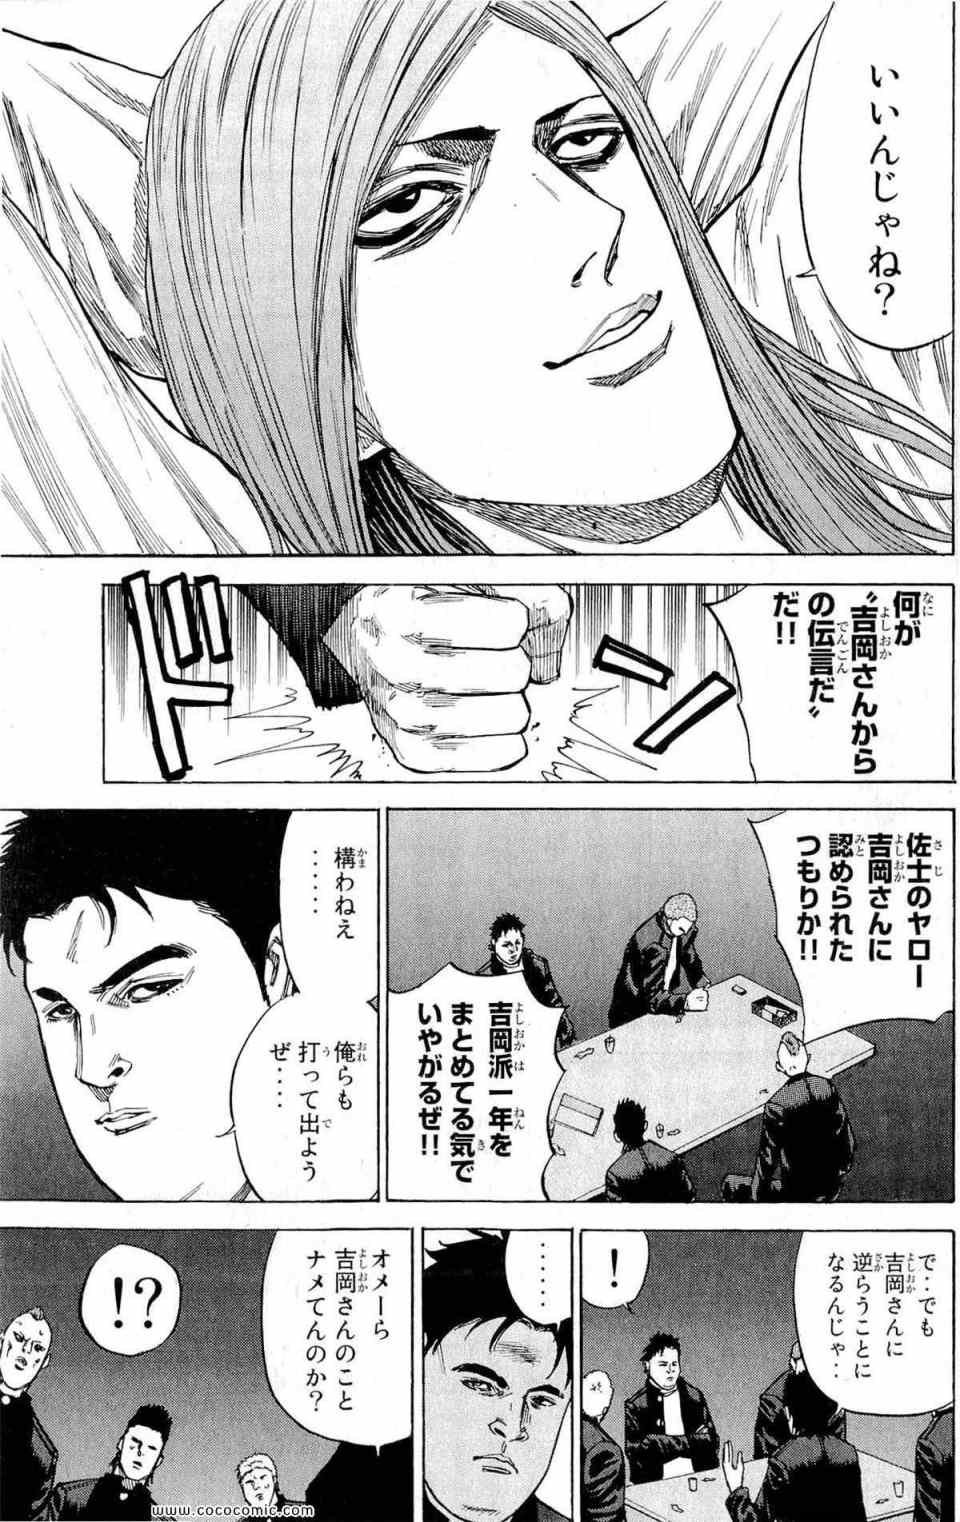 《A-BOUT!(日文)》漫画 A-BOUT! 07卷